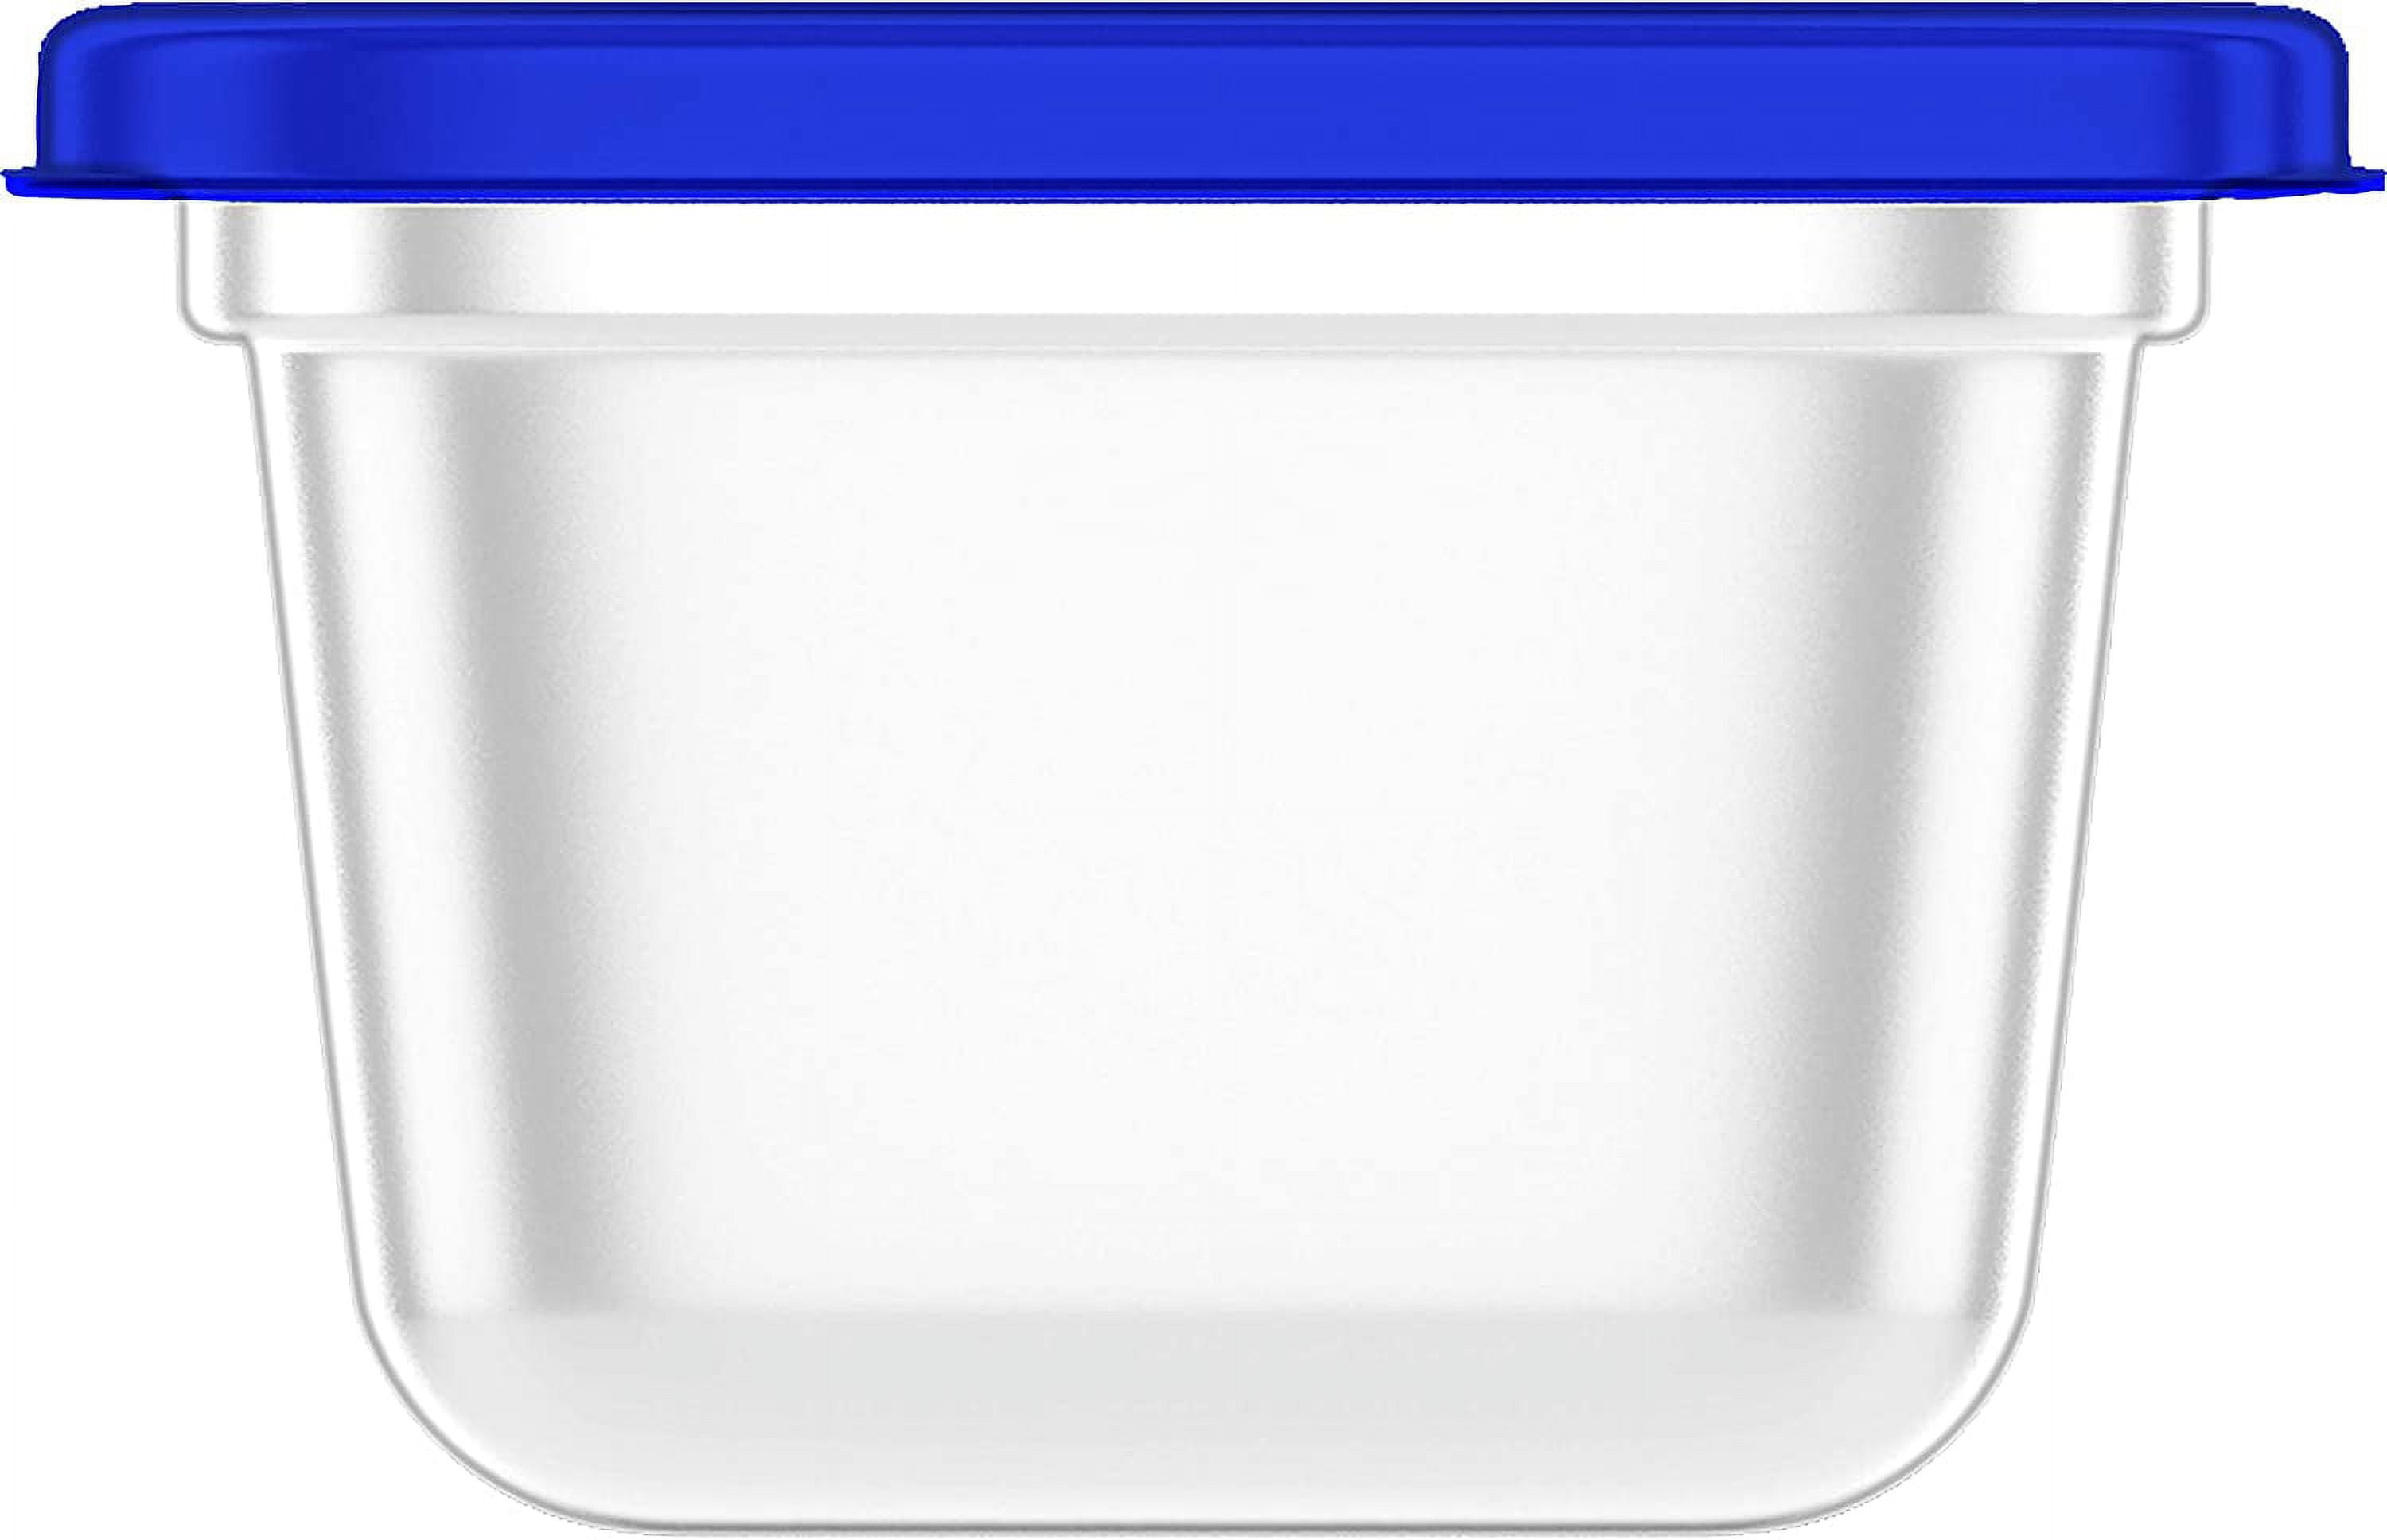 Ziploc® Brand, Food Storage Containers With Lids, Smart Snap Technology,  Mini Square, 8 Ct, Plastic Containers